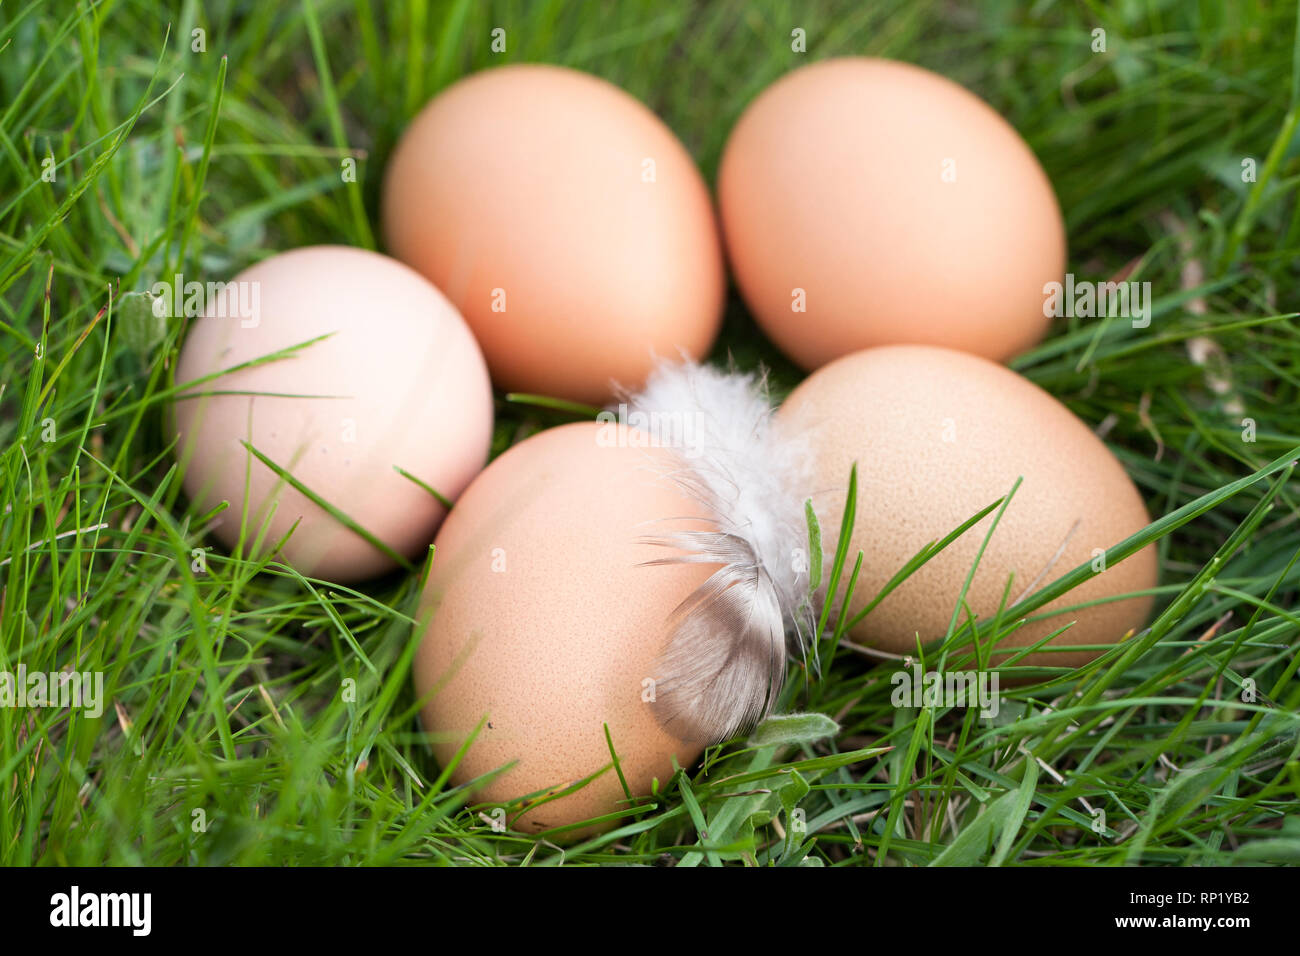 chicken eggs lying in a nest of green grass. Stock Photo